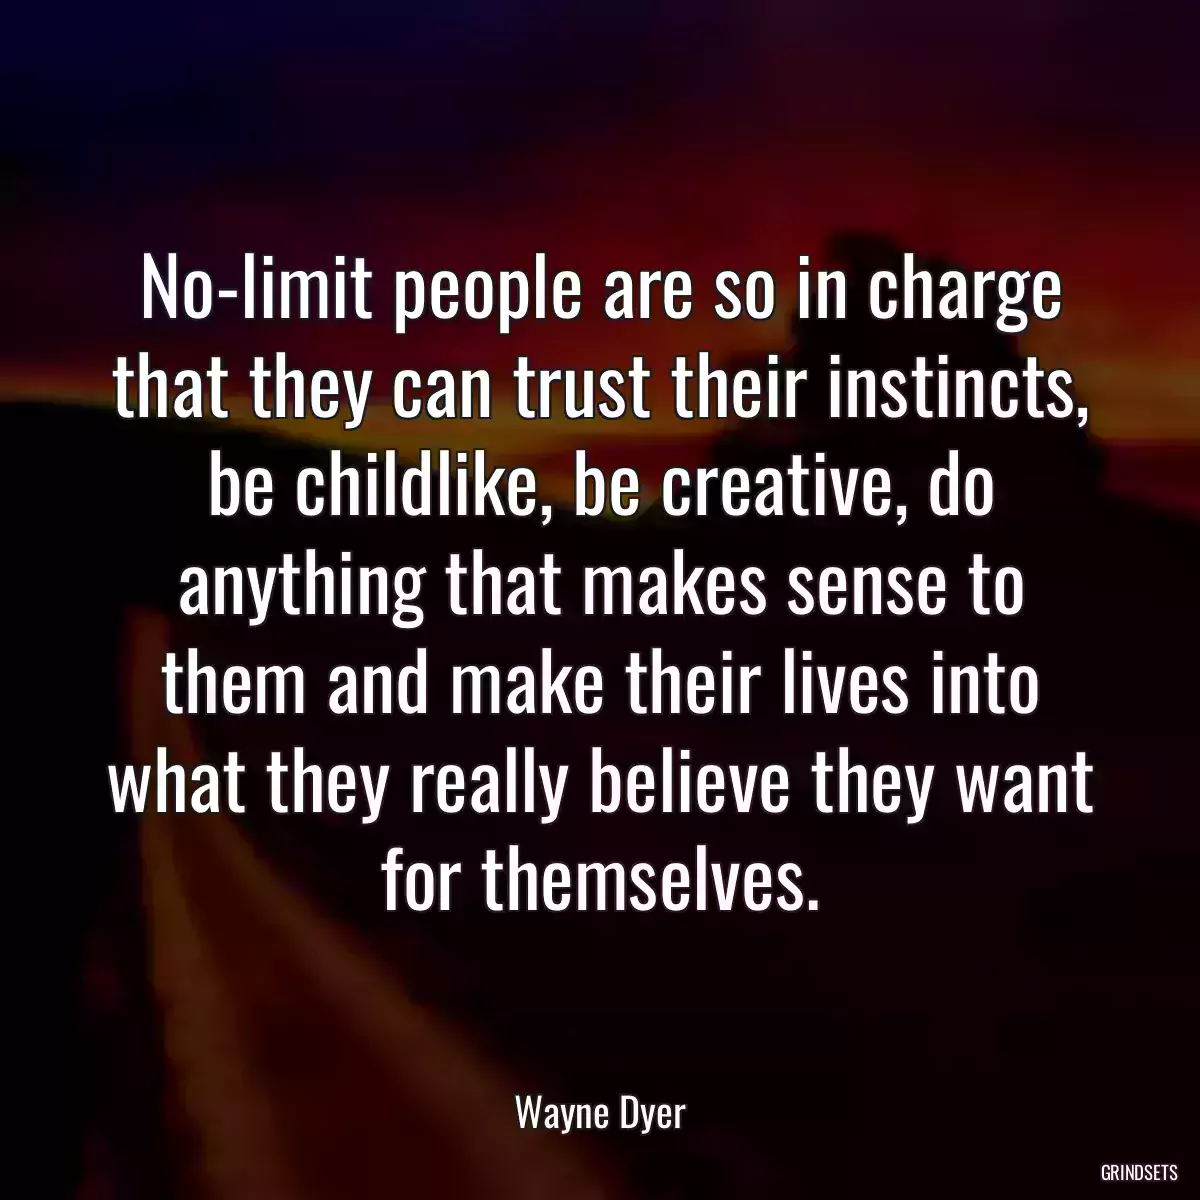 No-limit people are so in charge that they can trust their instincts, be childlike, be creative, do anything that makes sense to them and make their lives into what they really believe they want for themselves.